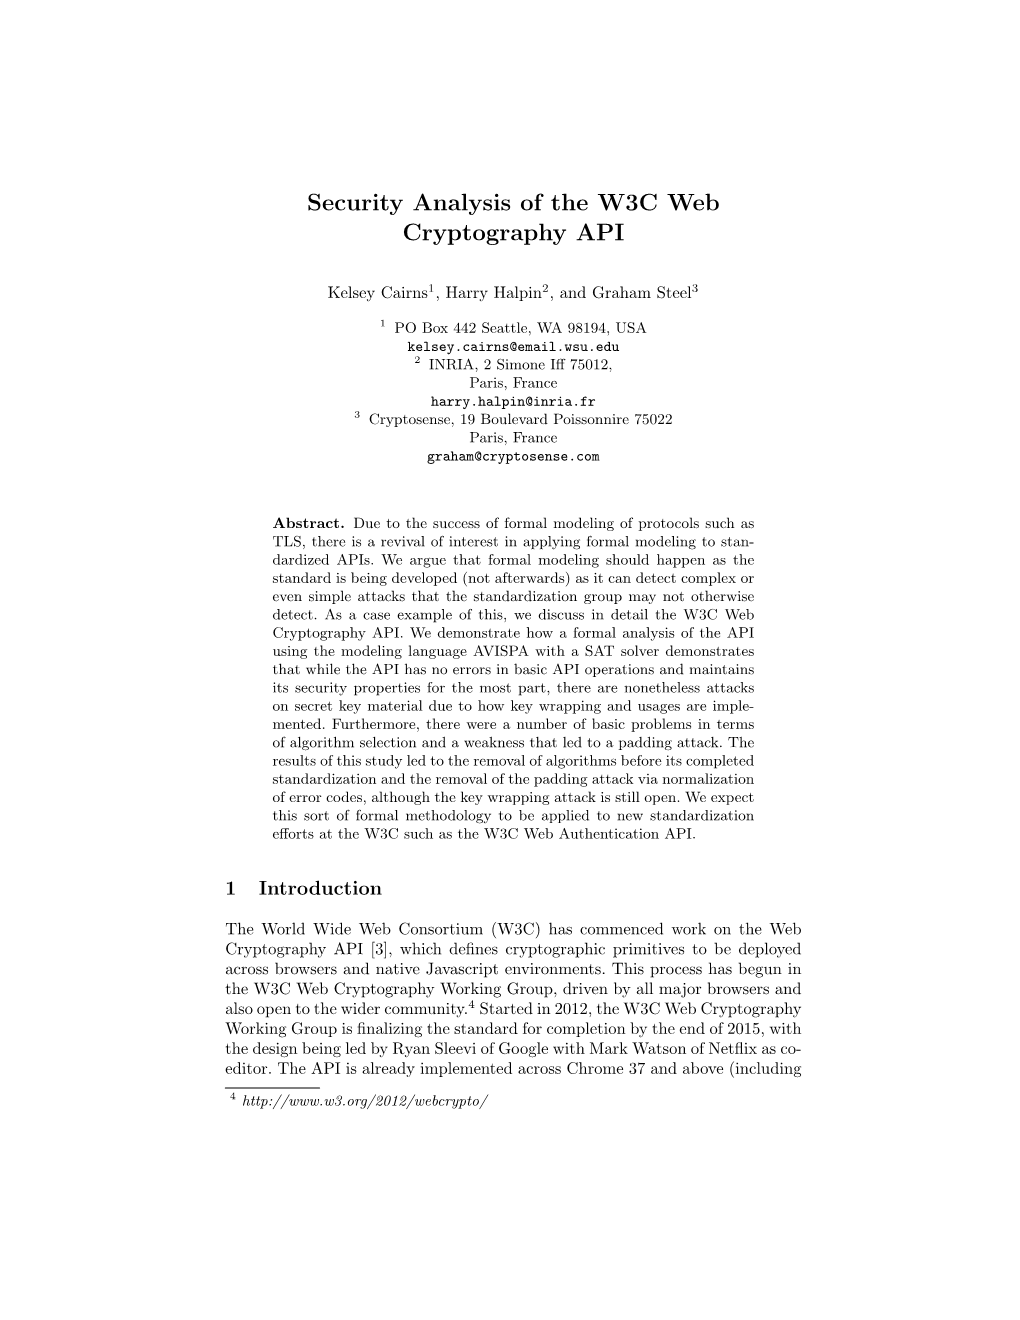 Security Analysis of the W3C Web Cryptography API